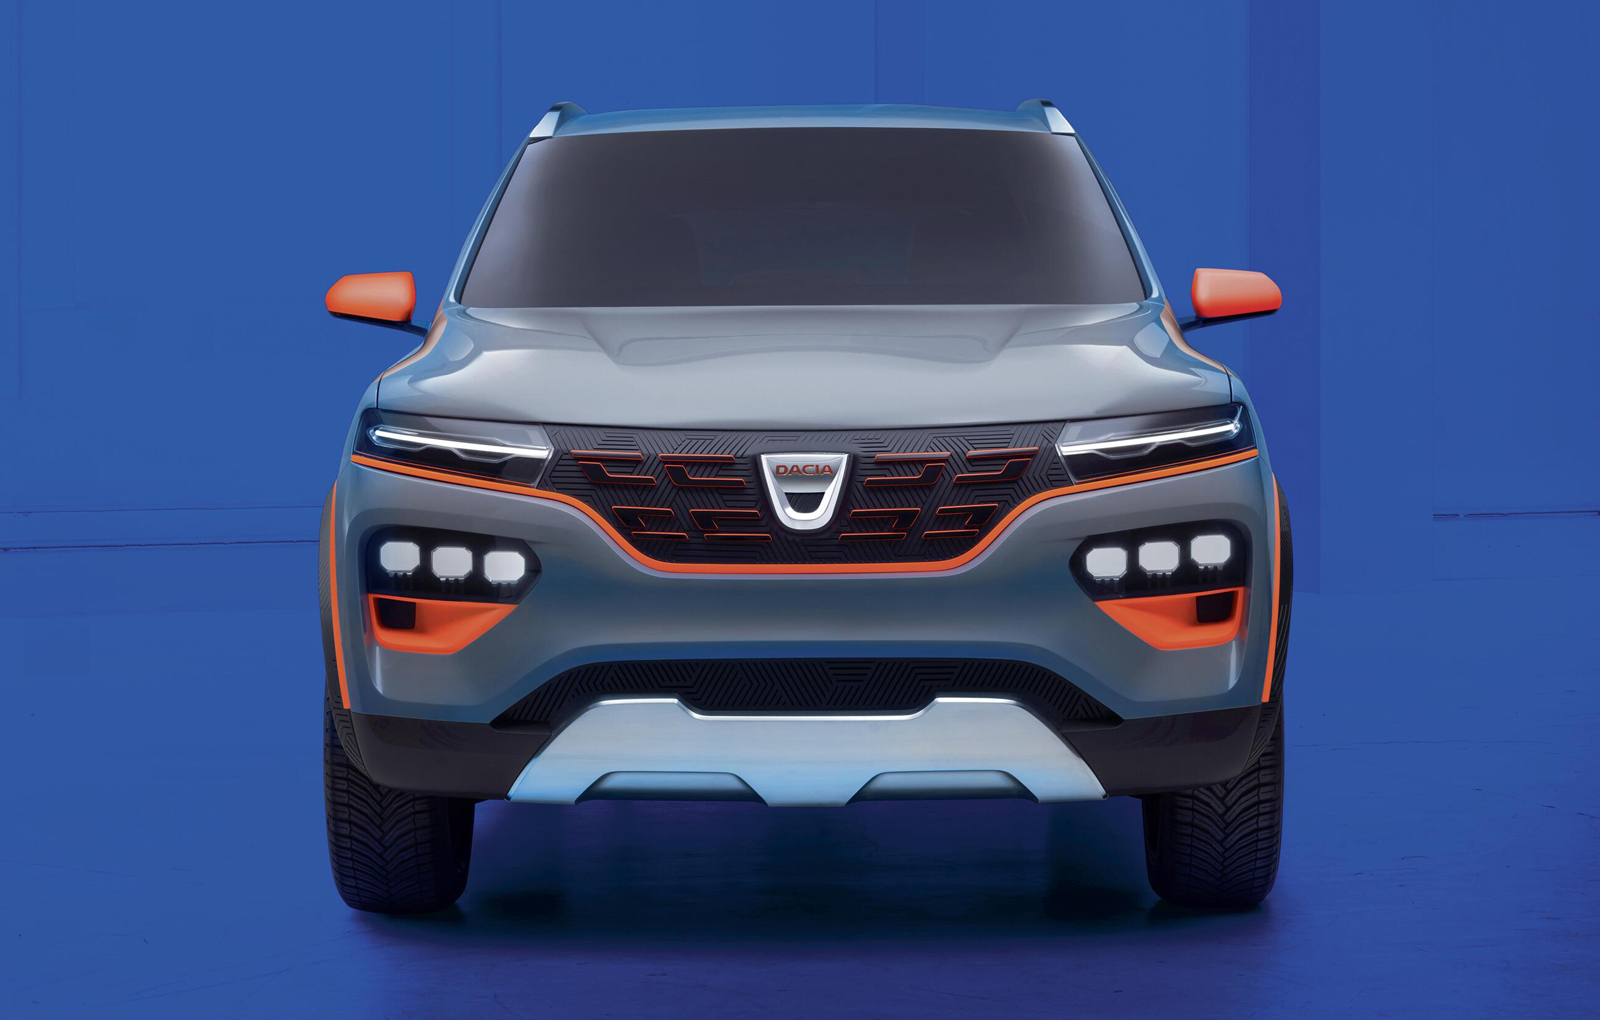 Dacia Spring the first electric model of Dacia will be launched in